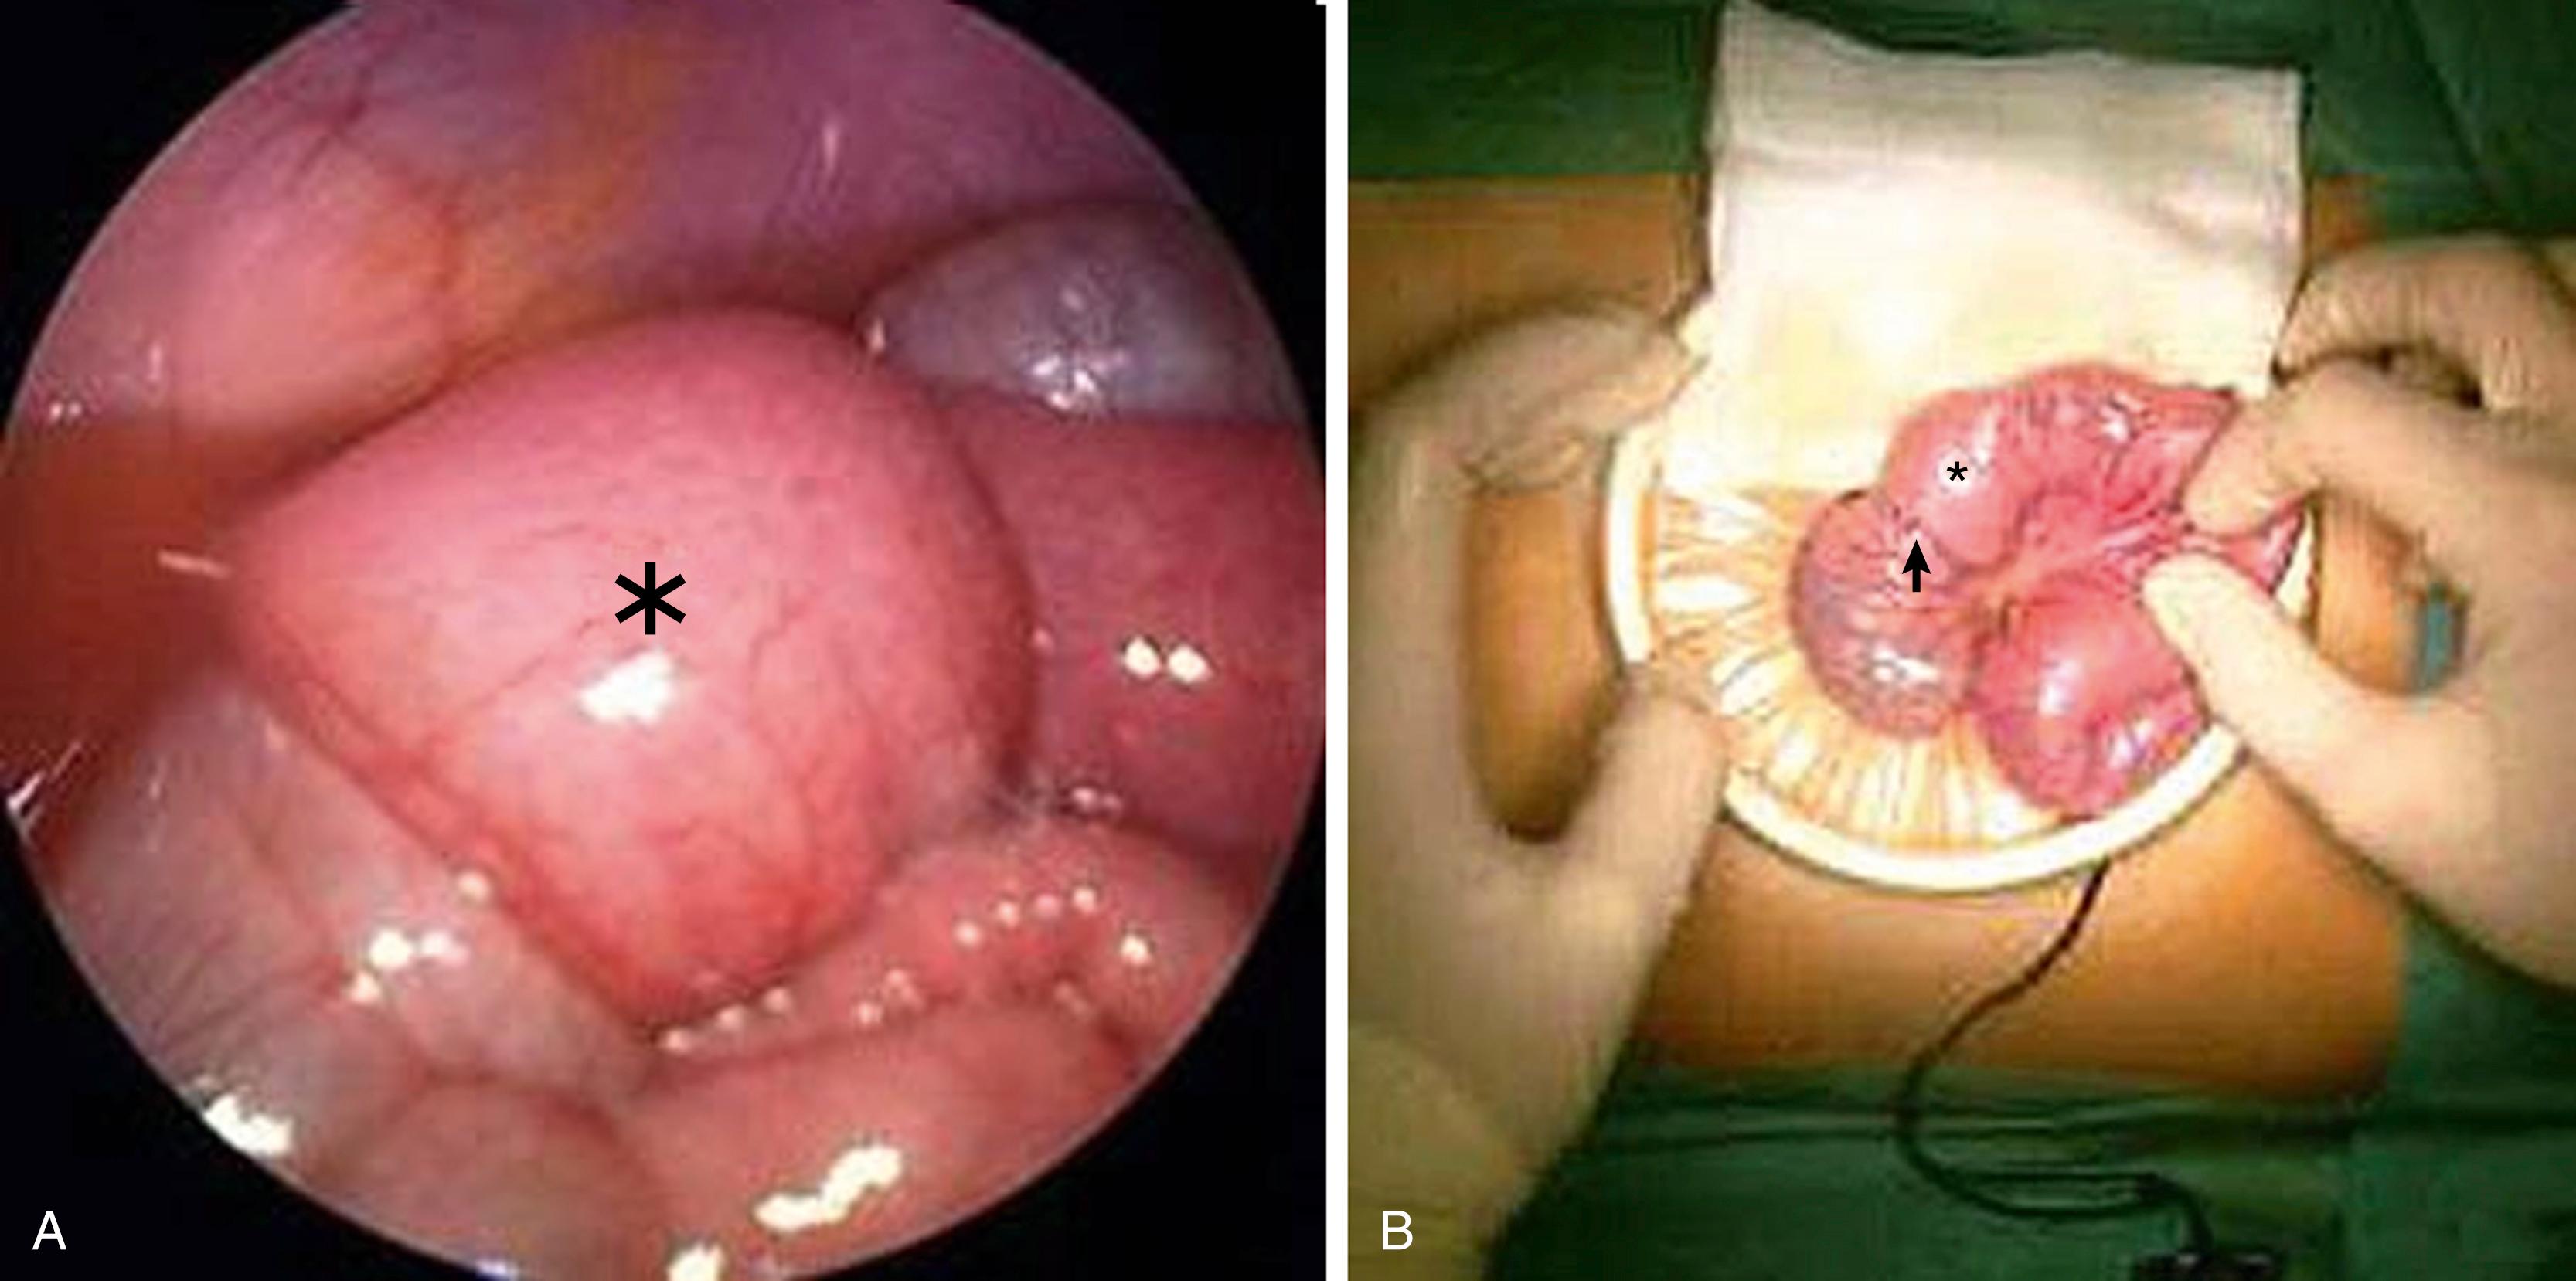 Figure 9-6, This intraoperative view shows an ileoileal intussusception (asterisk) that did not resolve spontaneously. A, Upon laparoscopic exploration, a mass (asterisk) was palpable in the lumen, which suggested a lead point. B, After exteriorization through the umbilical port site and manual open reduction, the intussusception ( arrow pointing to intussusceptum, asterisk marking intussuscipiens) was reduced. In the antimesenteric wall of the intussusceptum, an inverted Meckel diverticulum was found and resected.